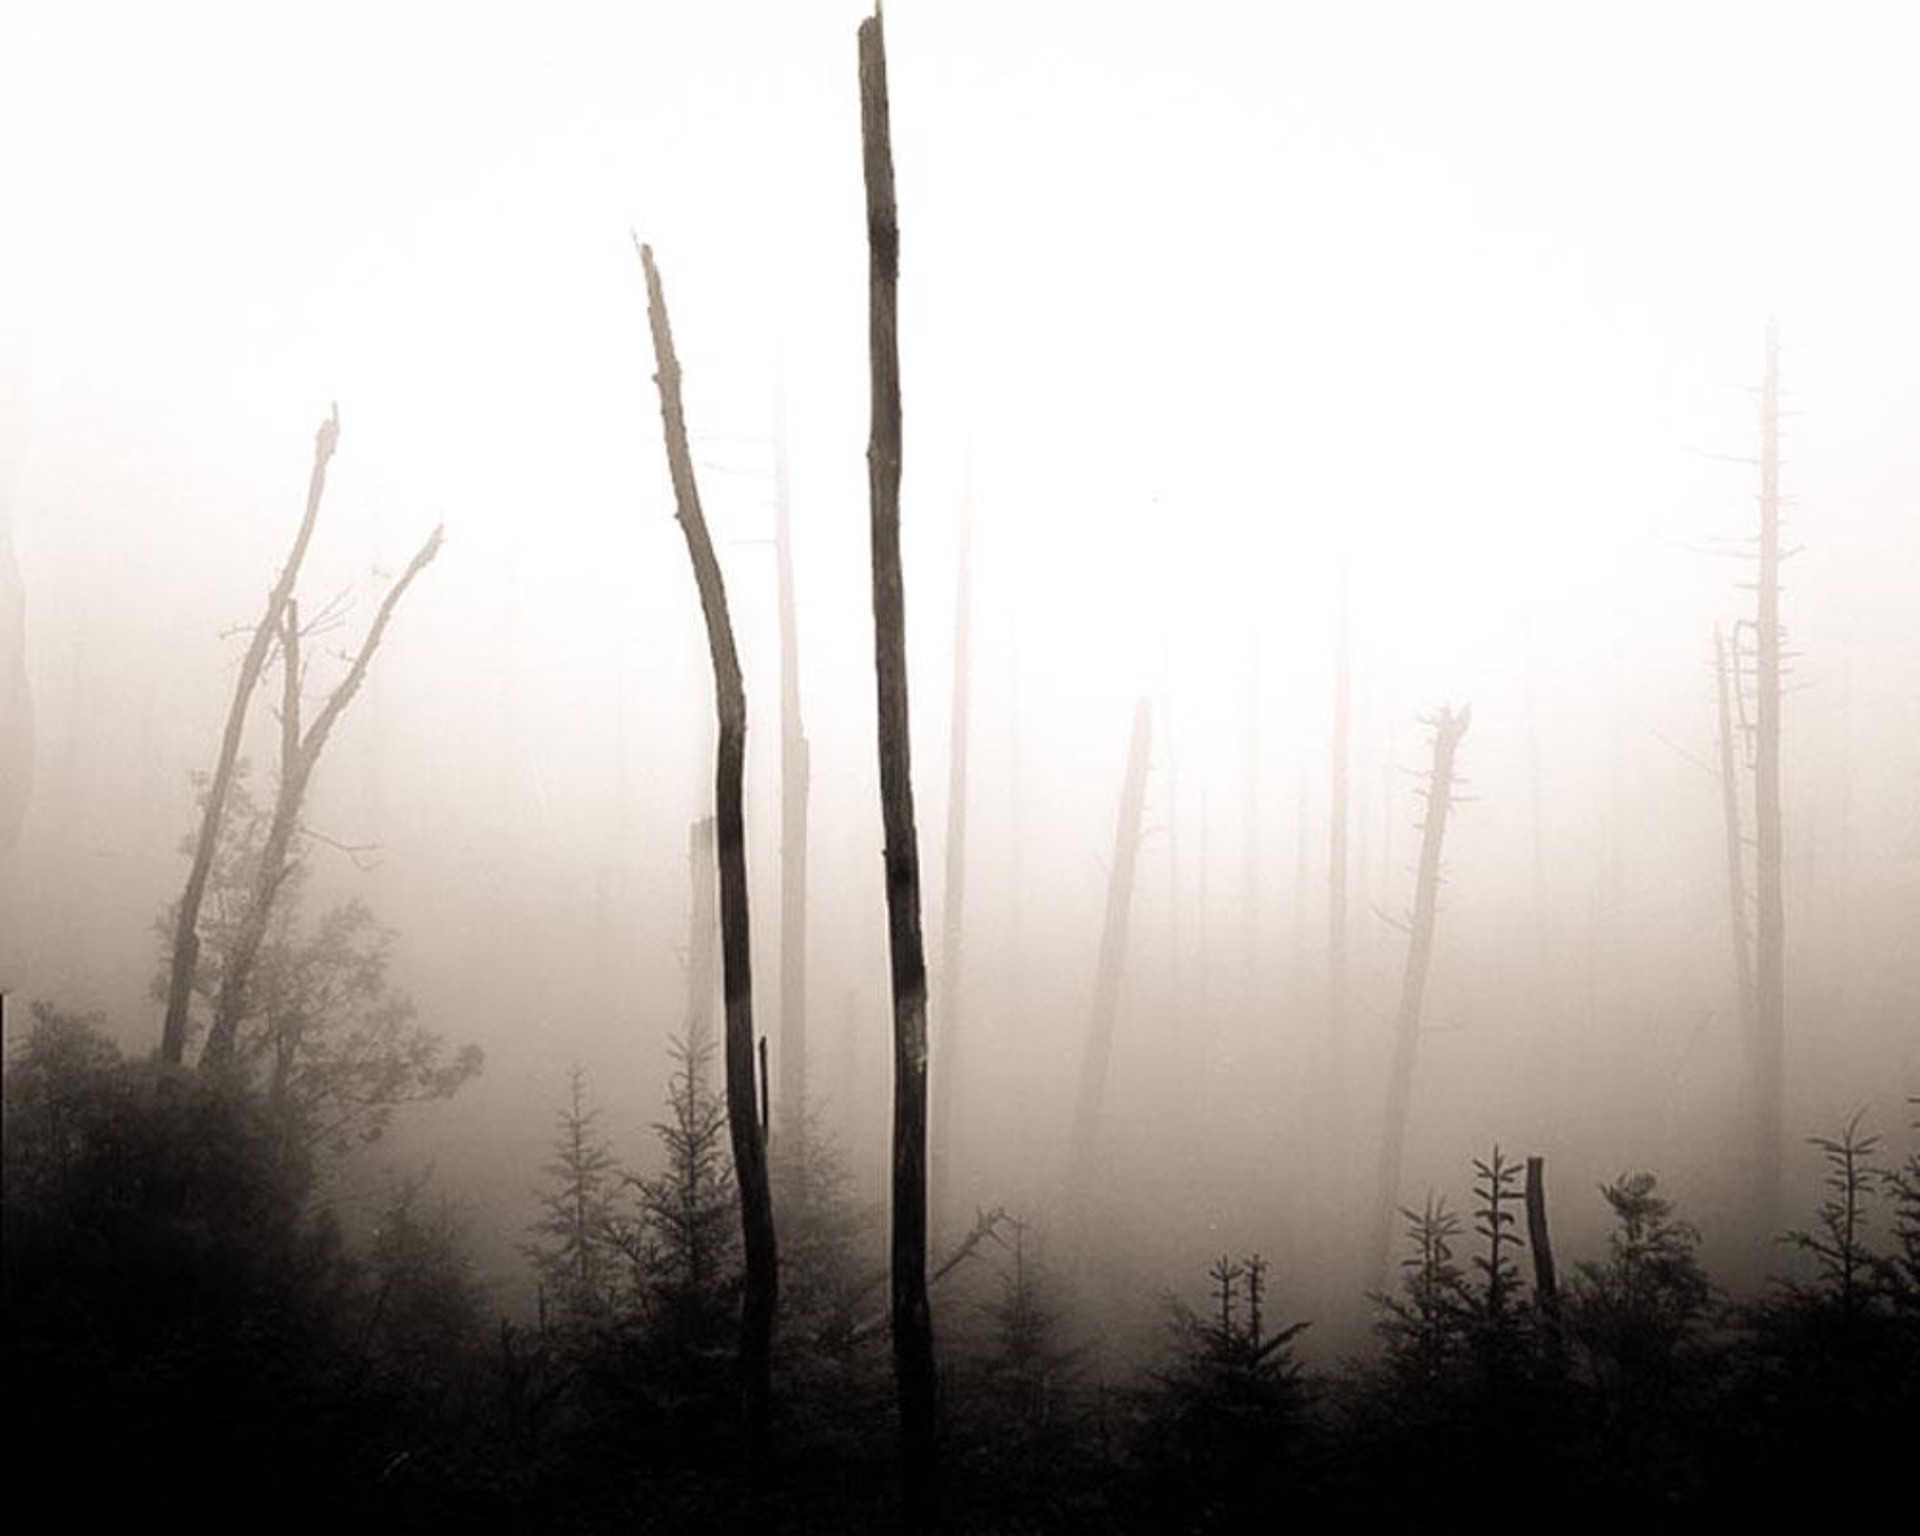 (#145) Two Trees in Fog, Mt. Mitchell, NC by Frank Hunter